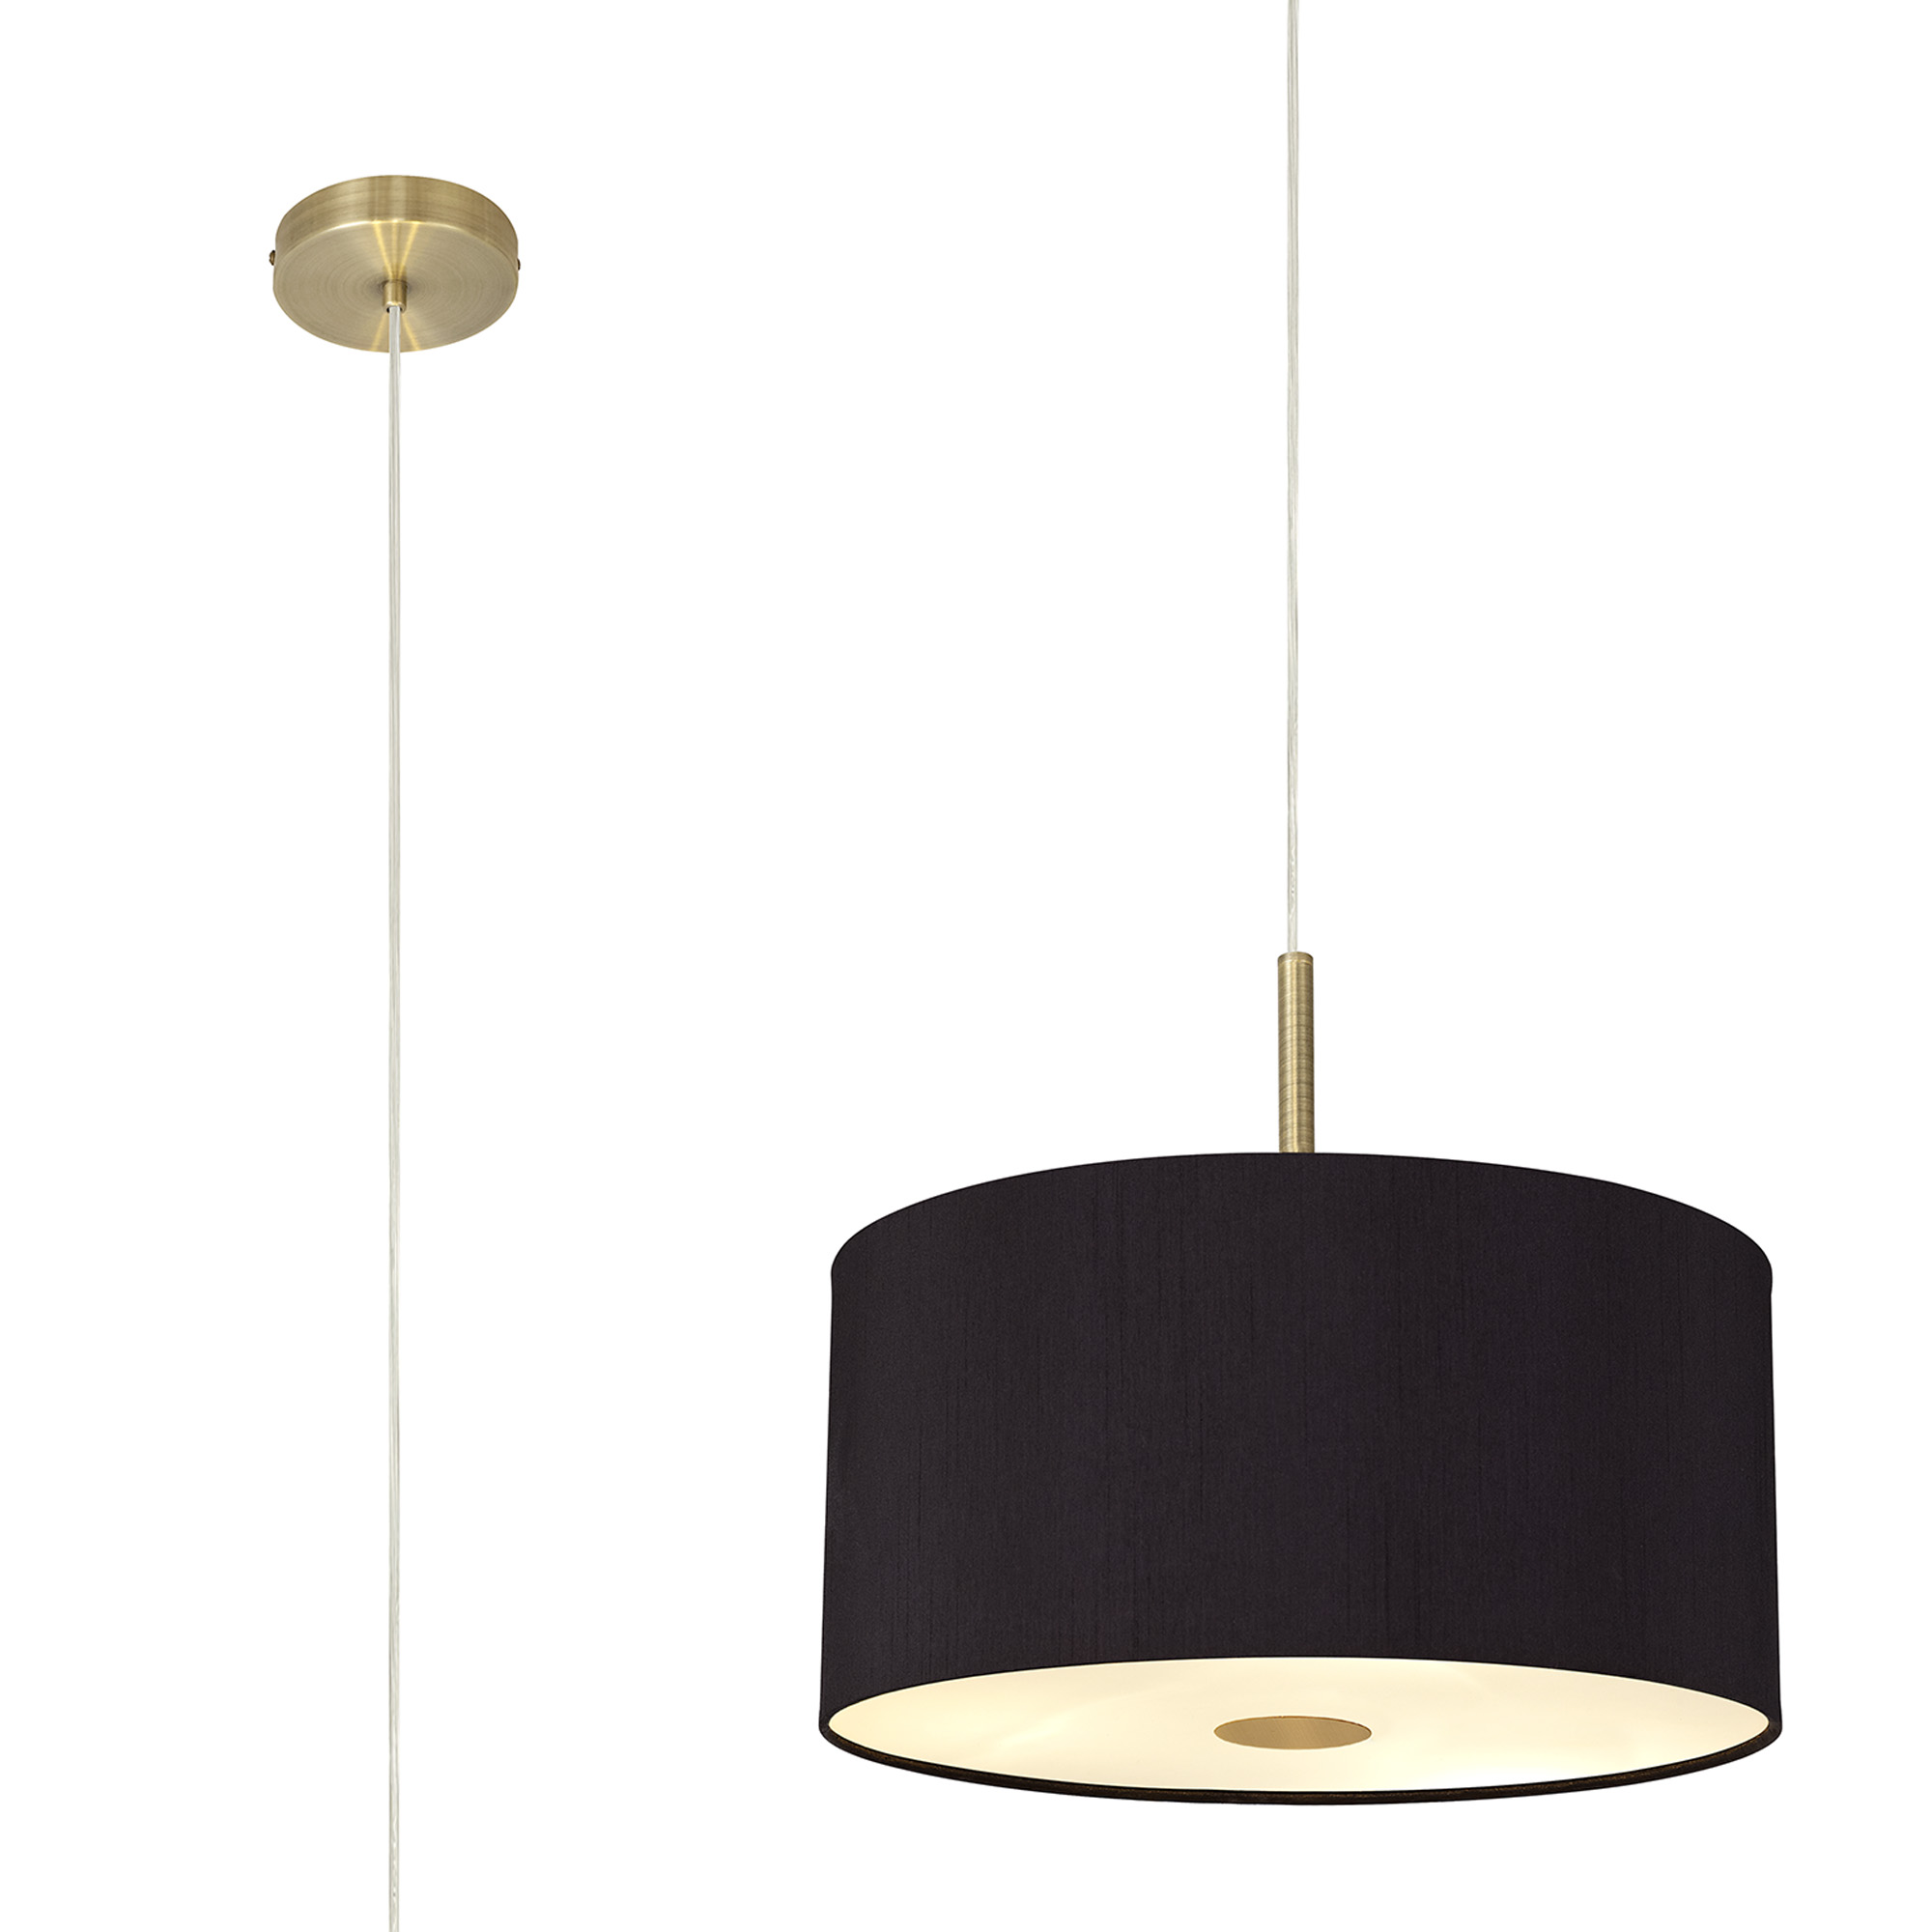 DK0513  Baymont 40cm 5 Light Pendant Antique Brass, Midnight Black/Green Olive, Frosted Diffuser